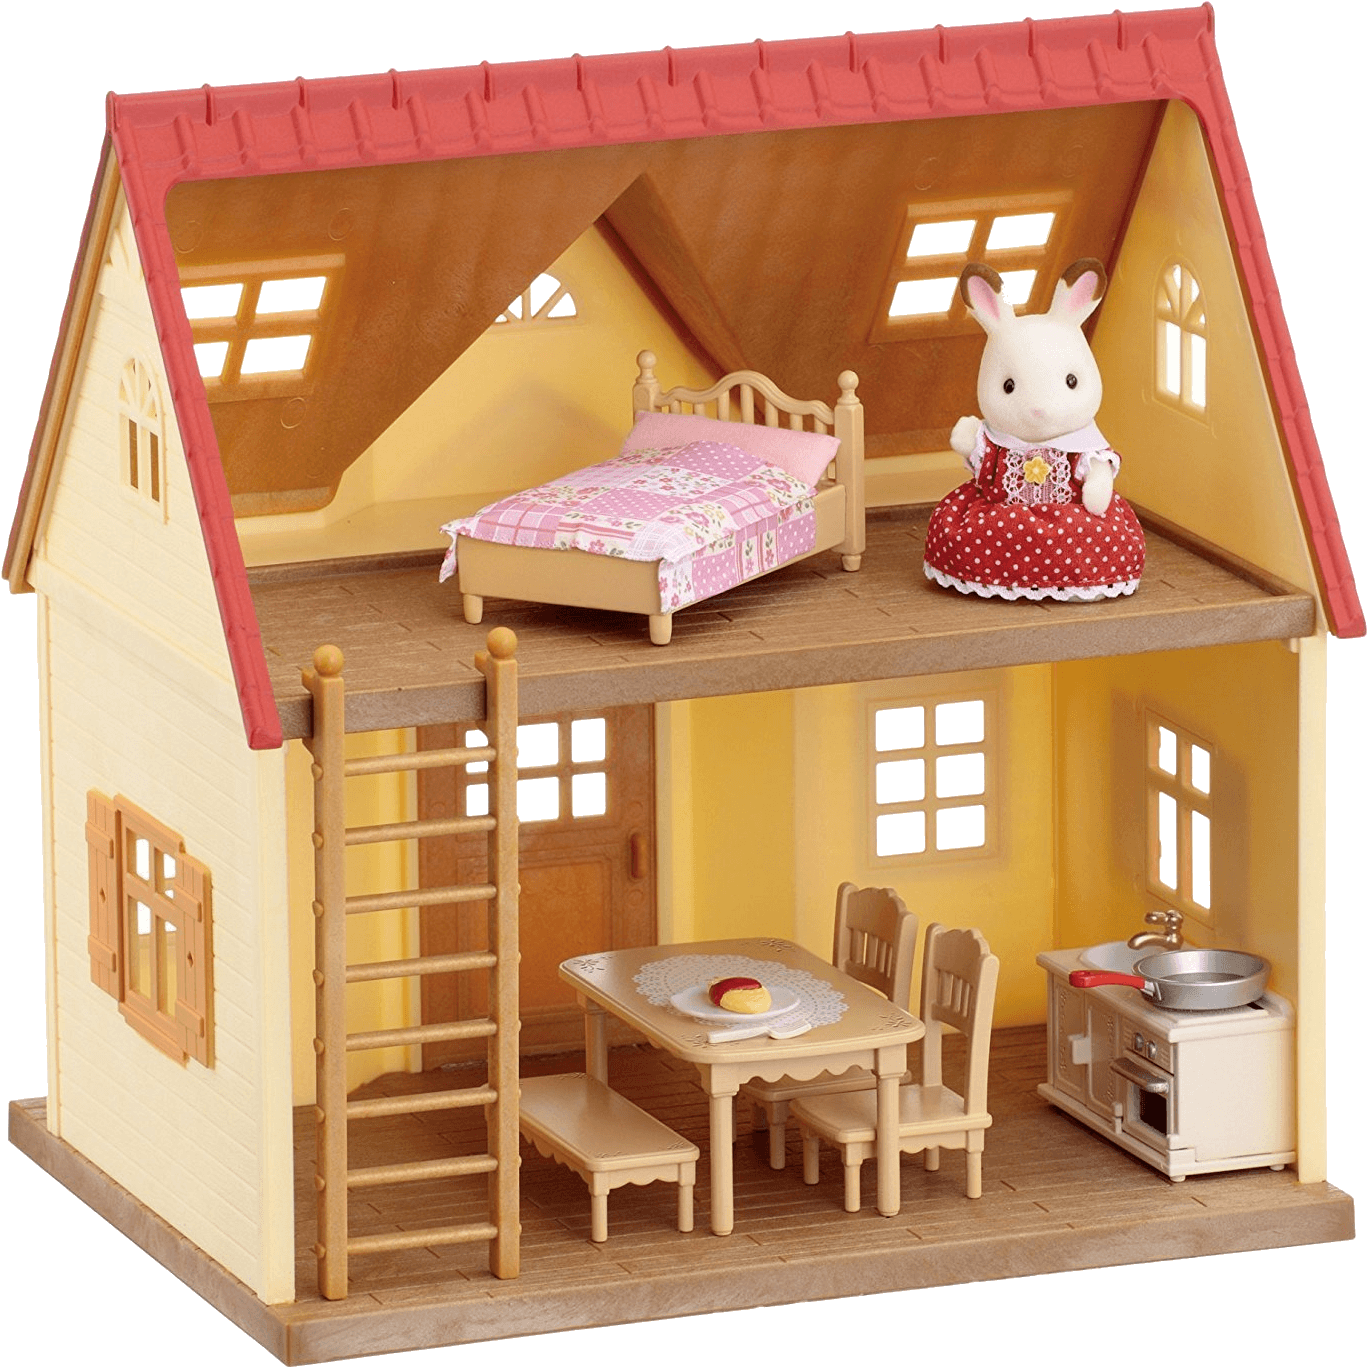 A Toy House With A Doll And Furniture